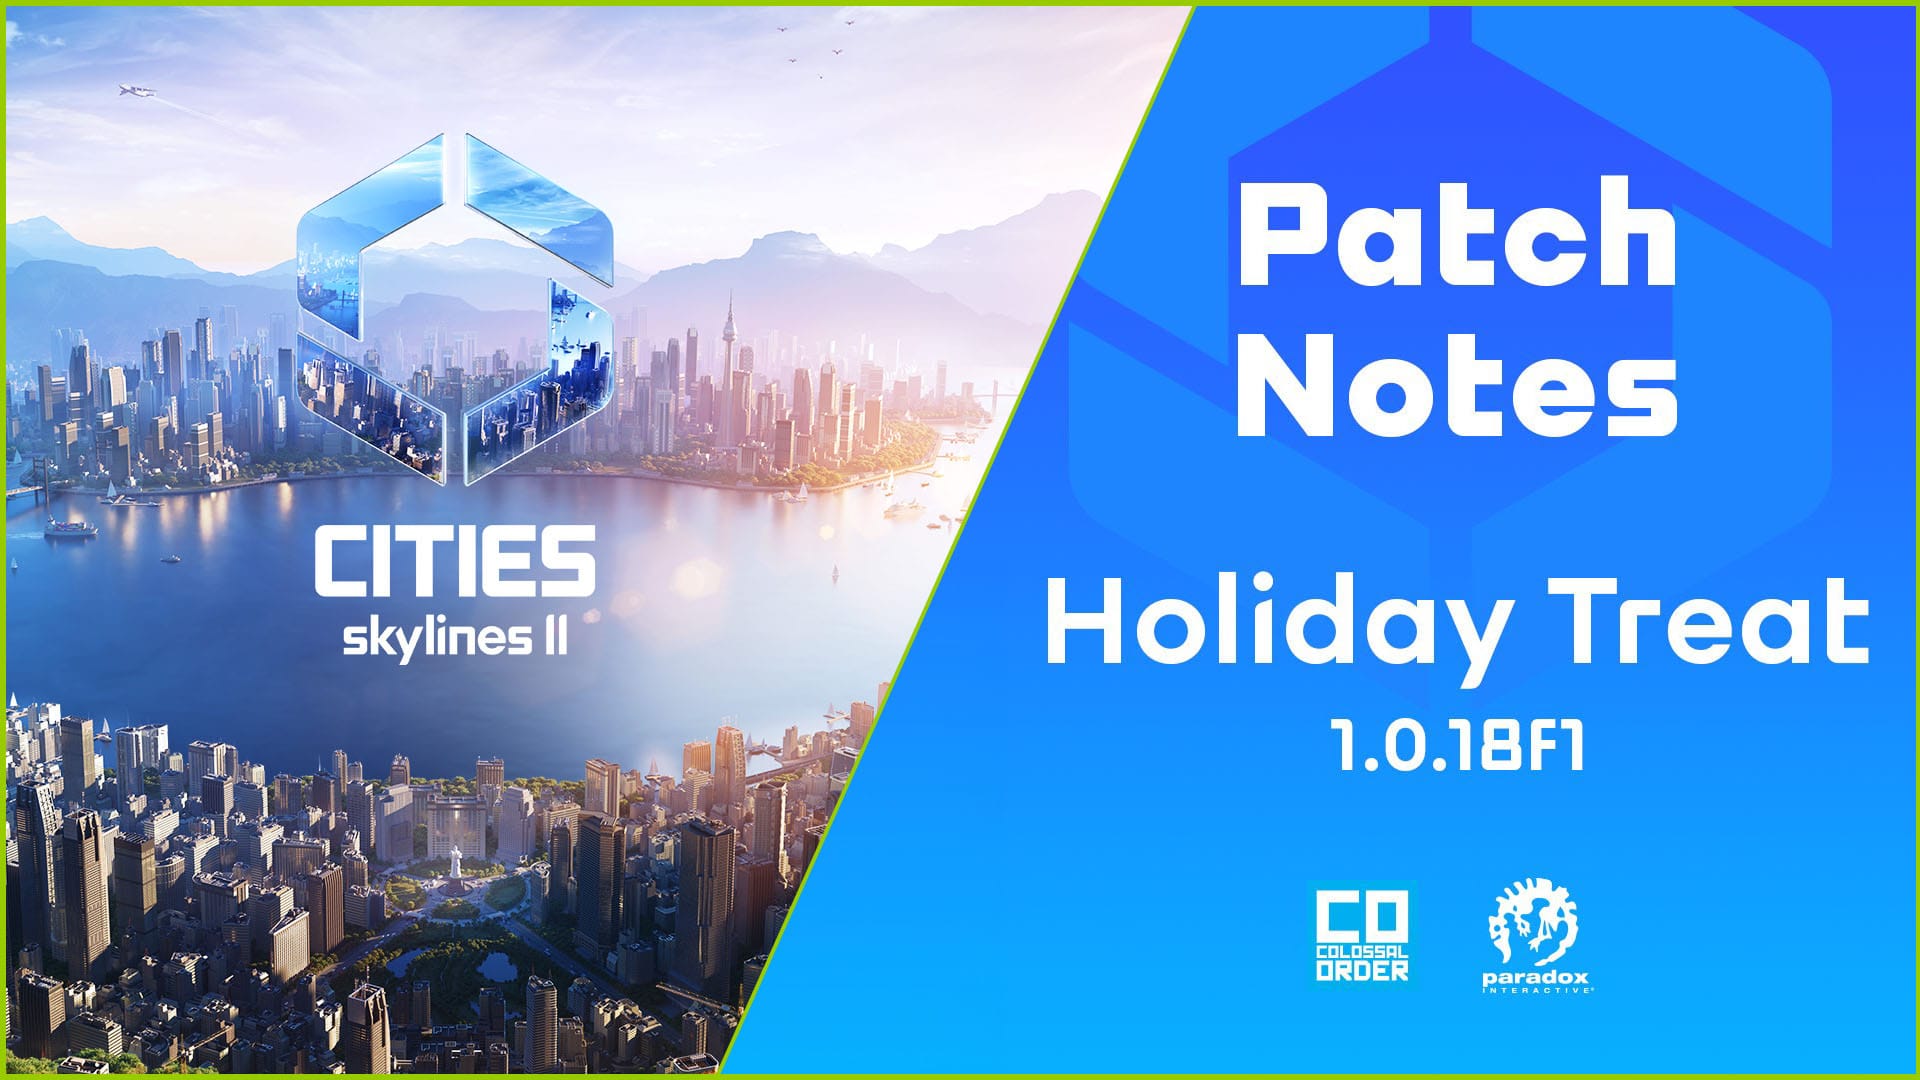 Cities: Skylines 2 Patch Available Now, Adds Character LODs to